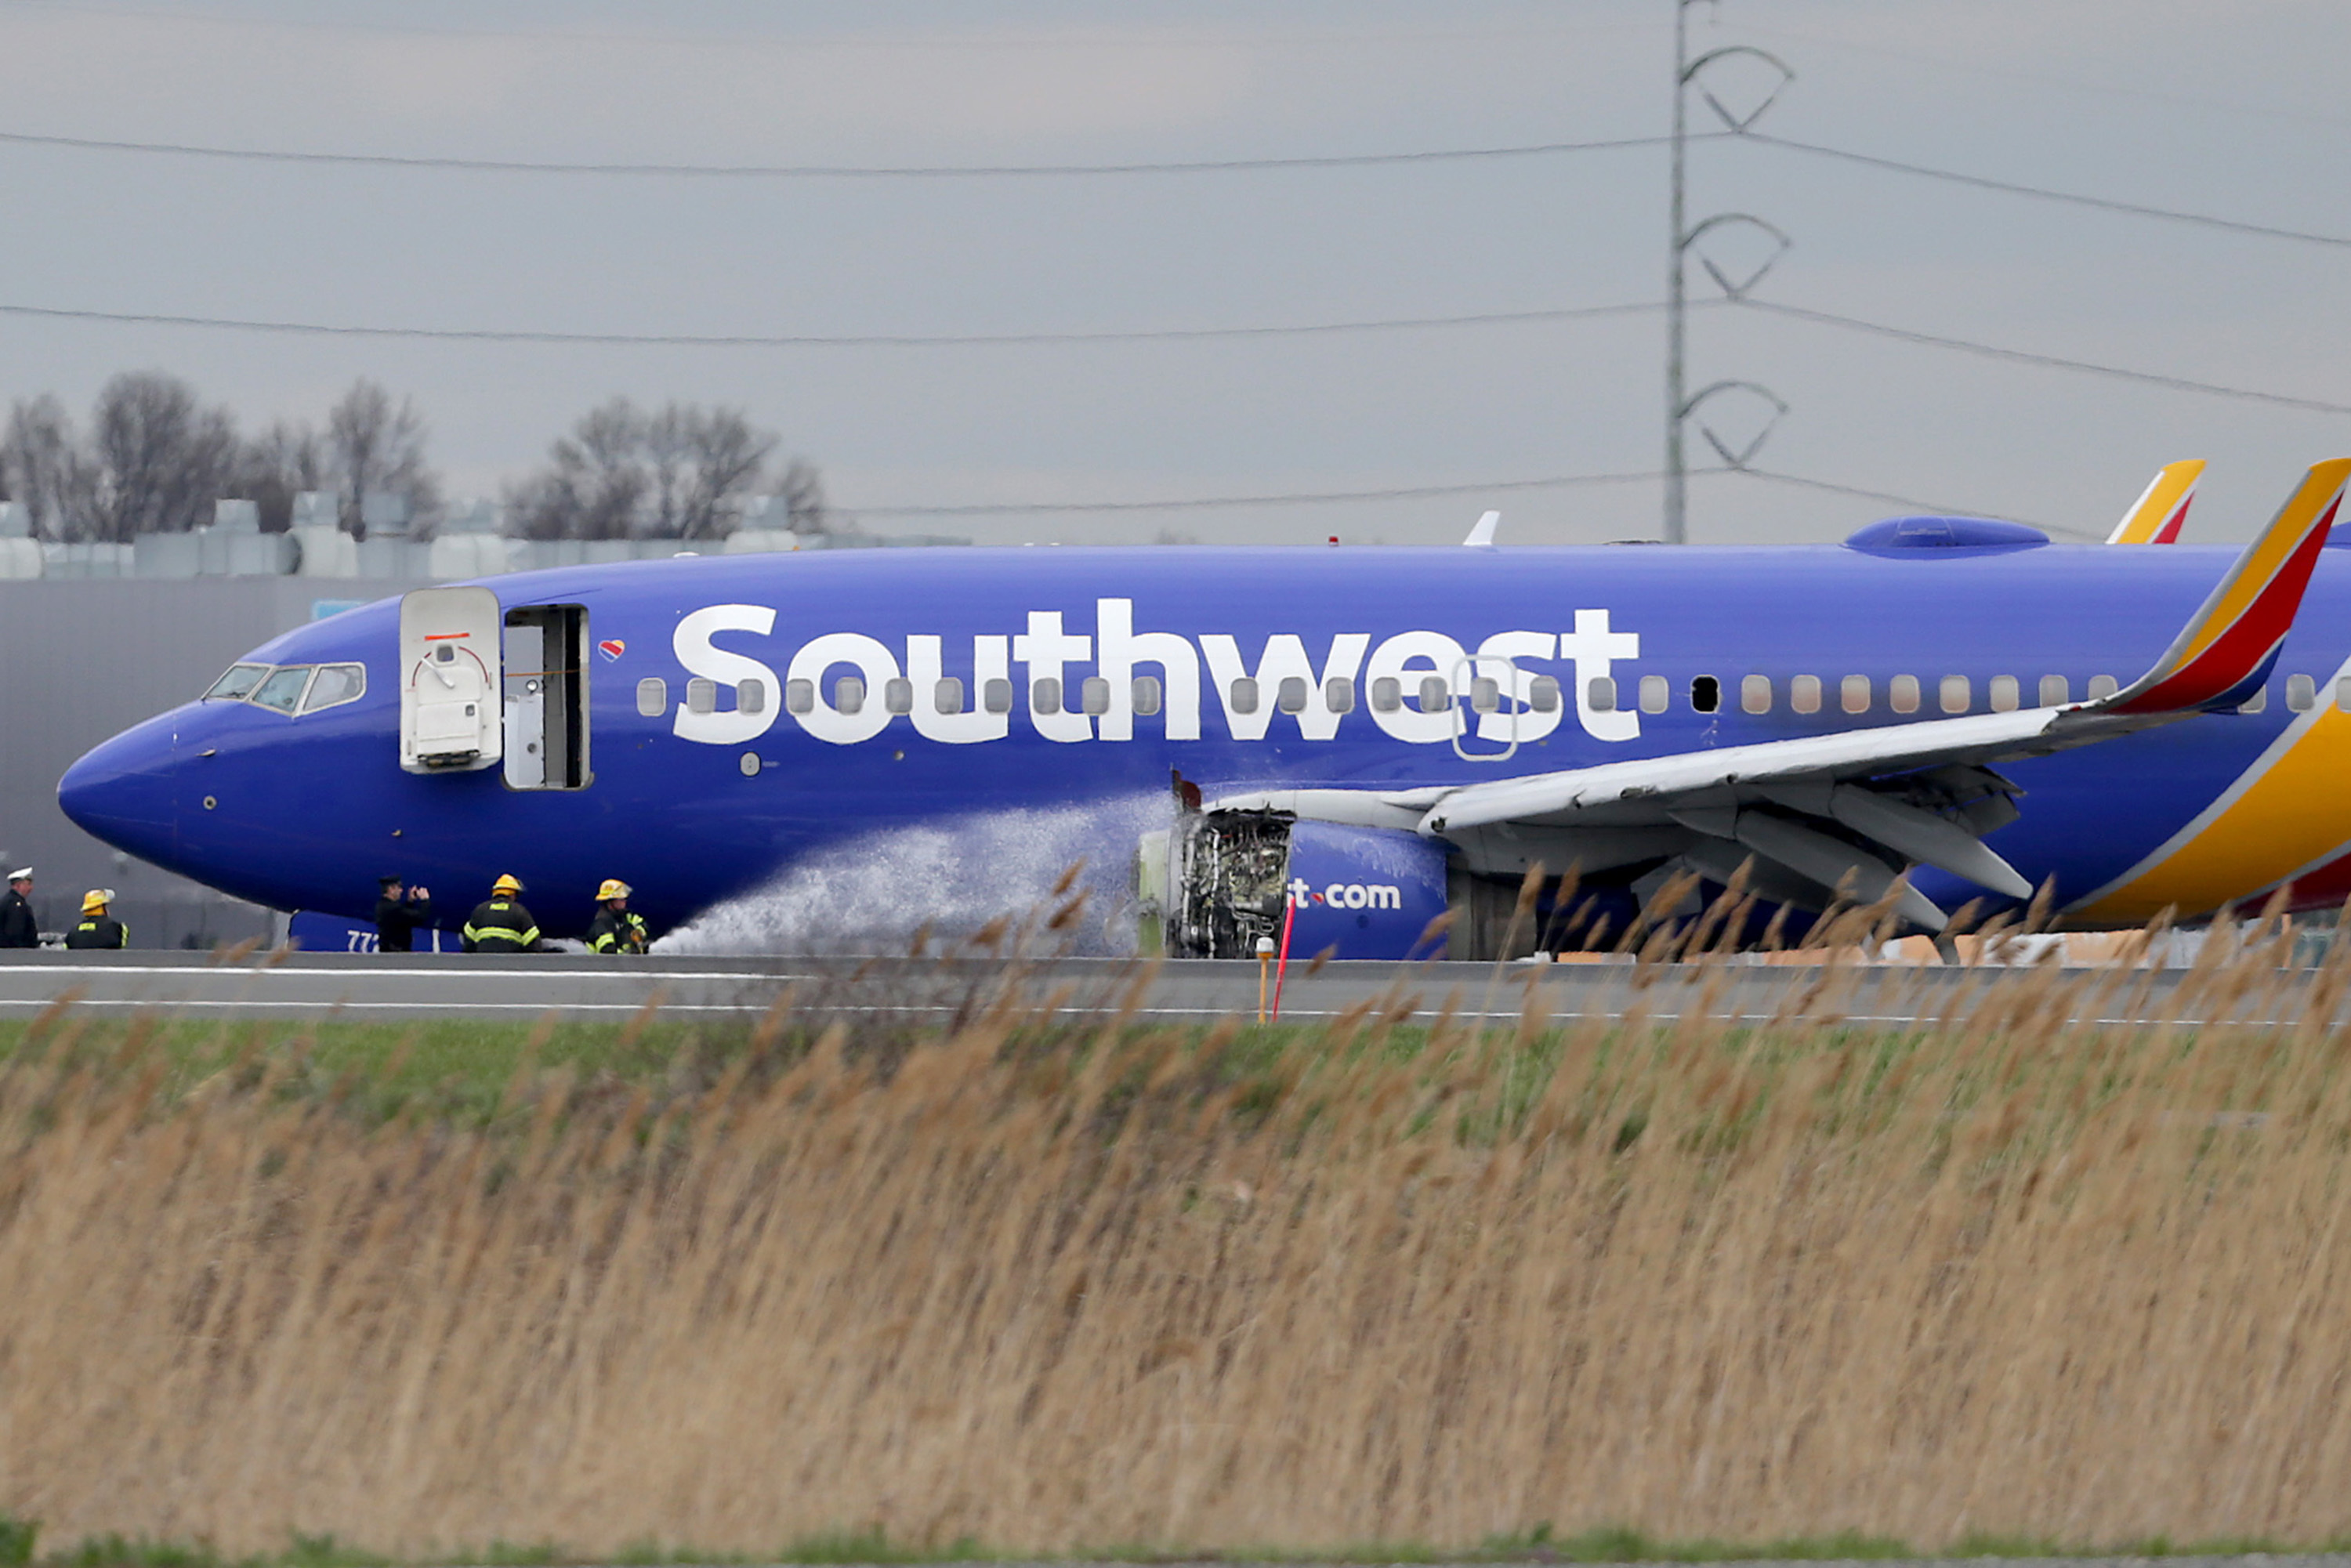 US NEWS SOUTHWEST PLANE PH | Southwest Airlines stops all departures over ‘technology issues’ | The Paradise